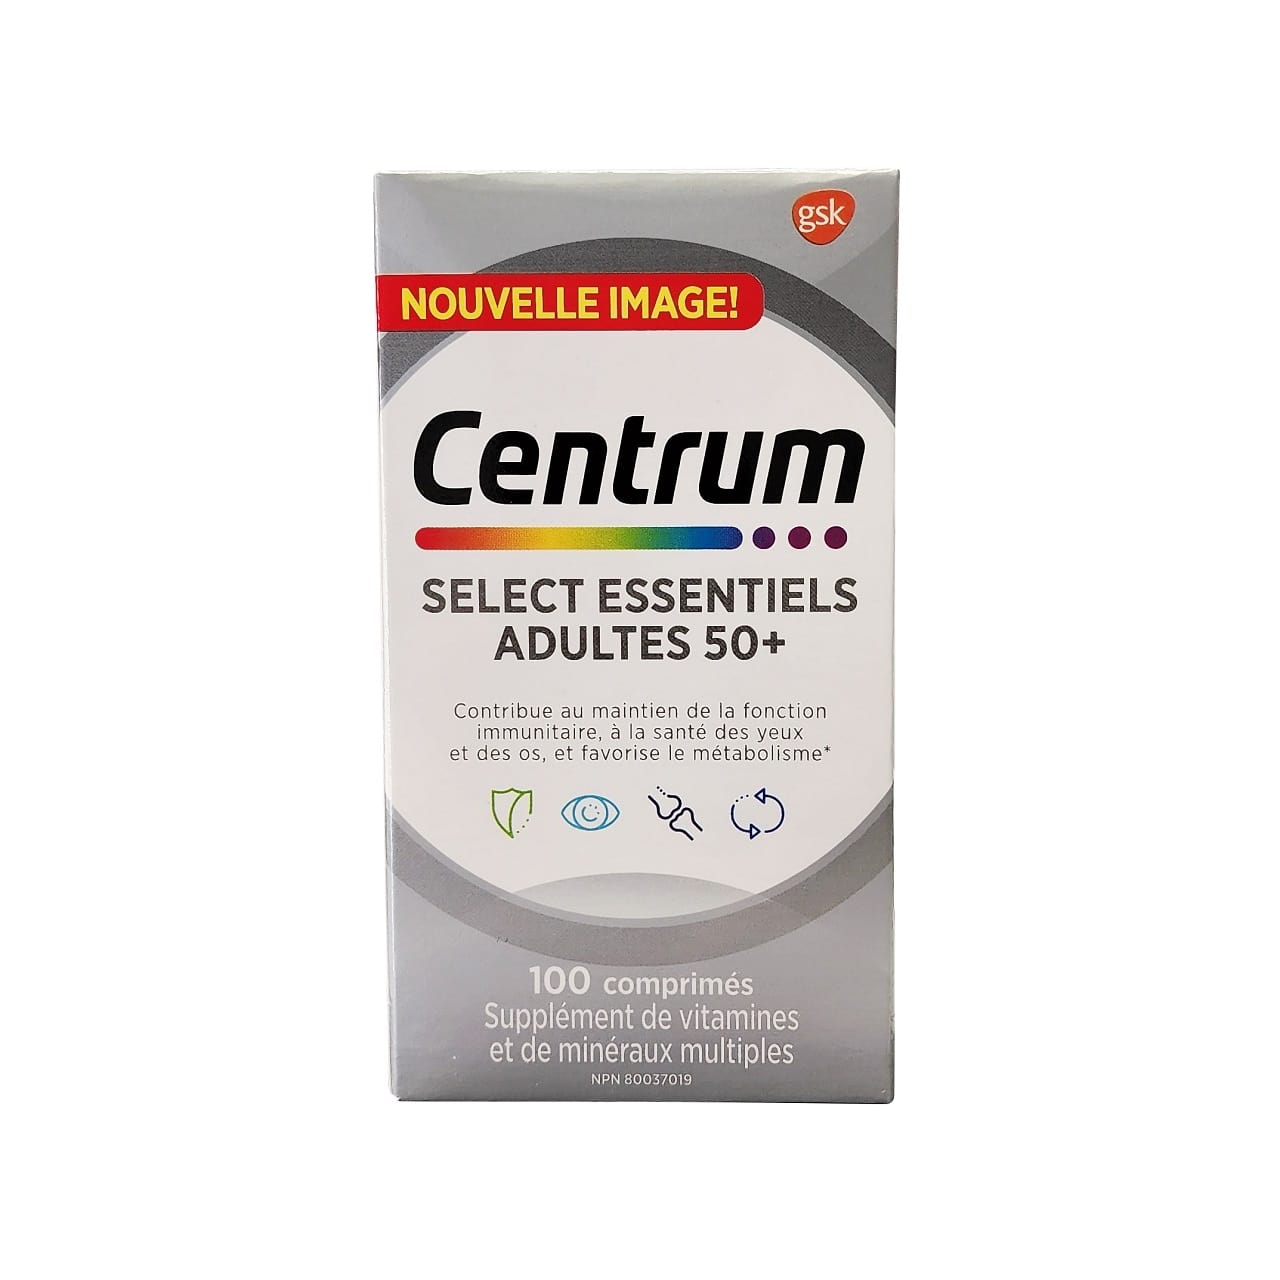 Product label for Centrum Select Essentials for Adults 50+ (100 tablets) in French